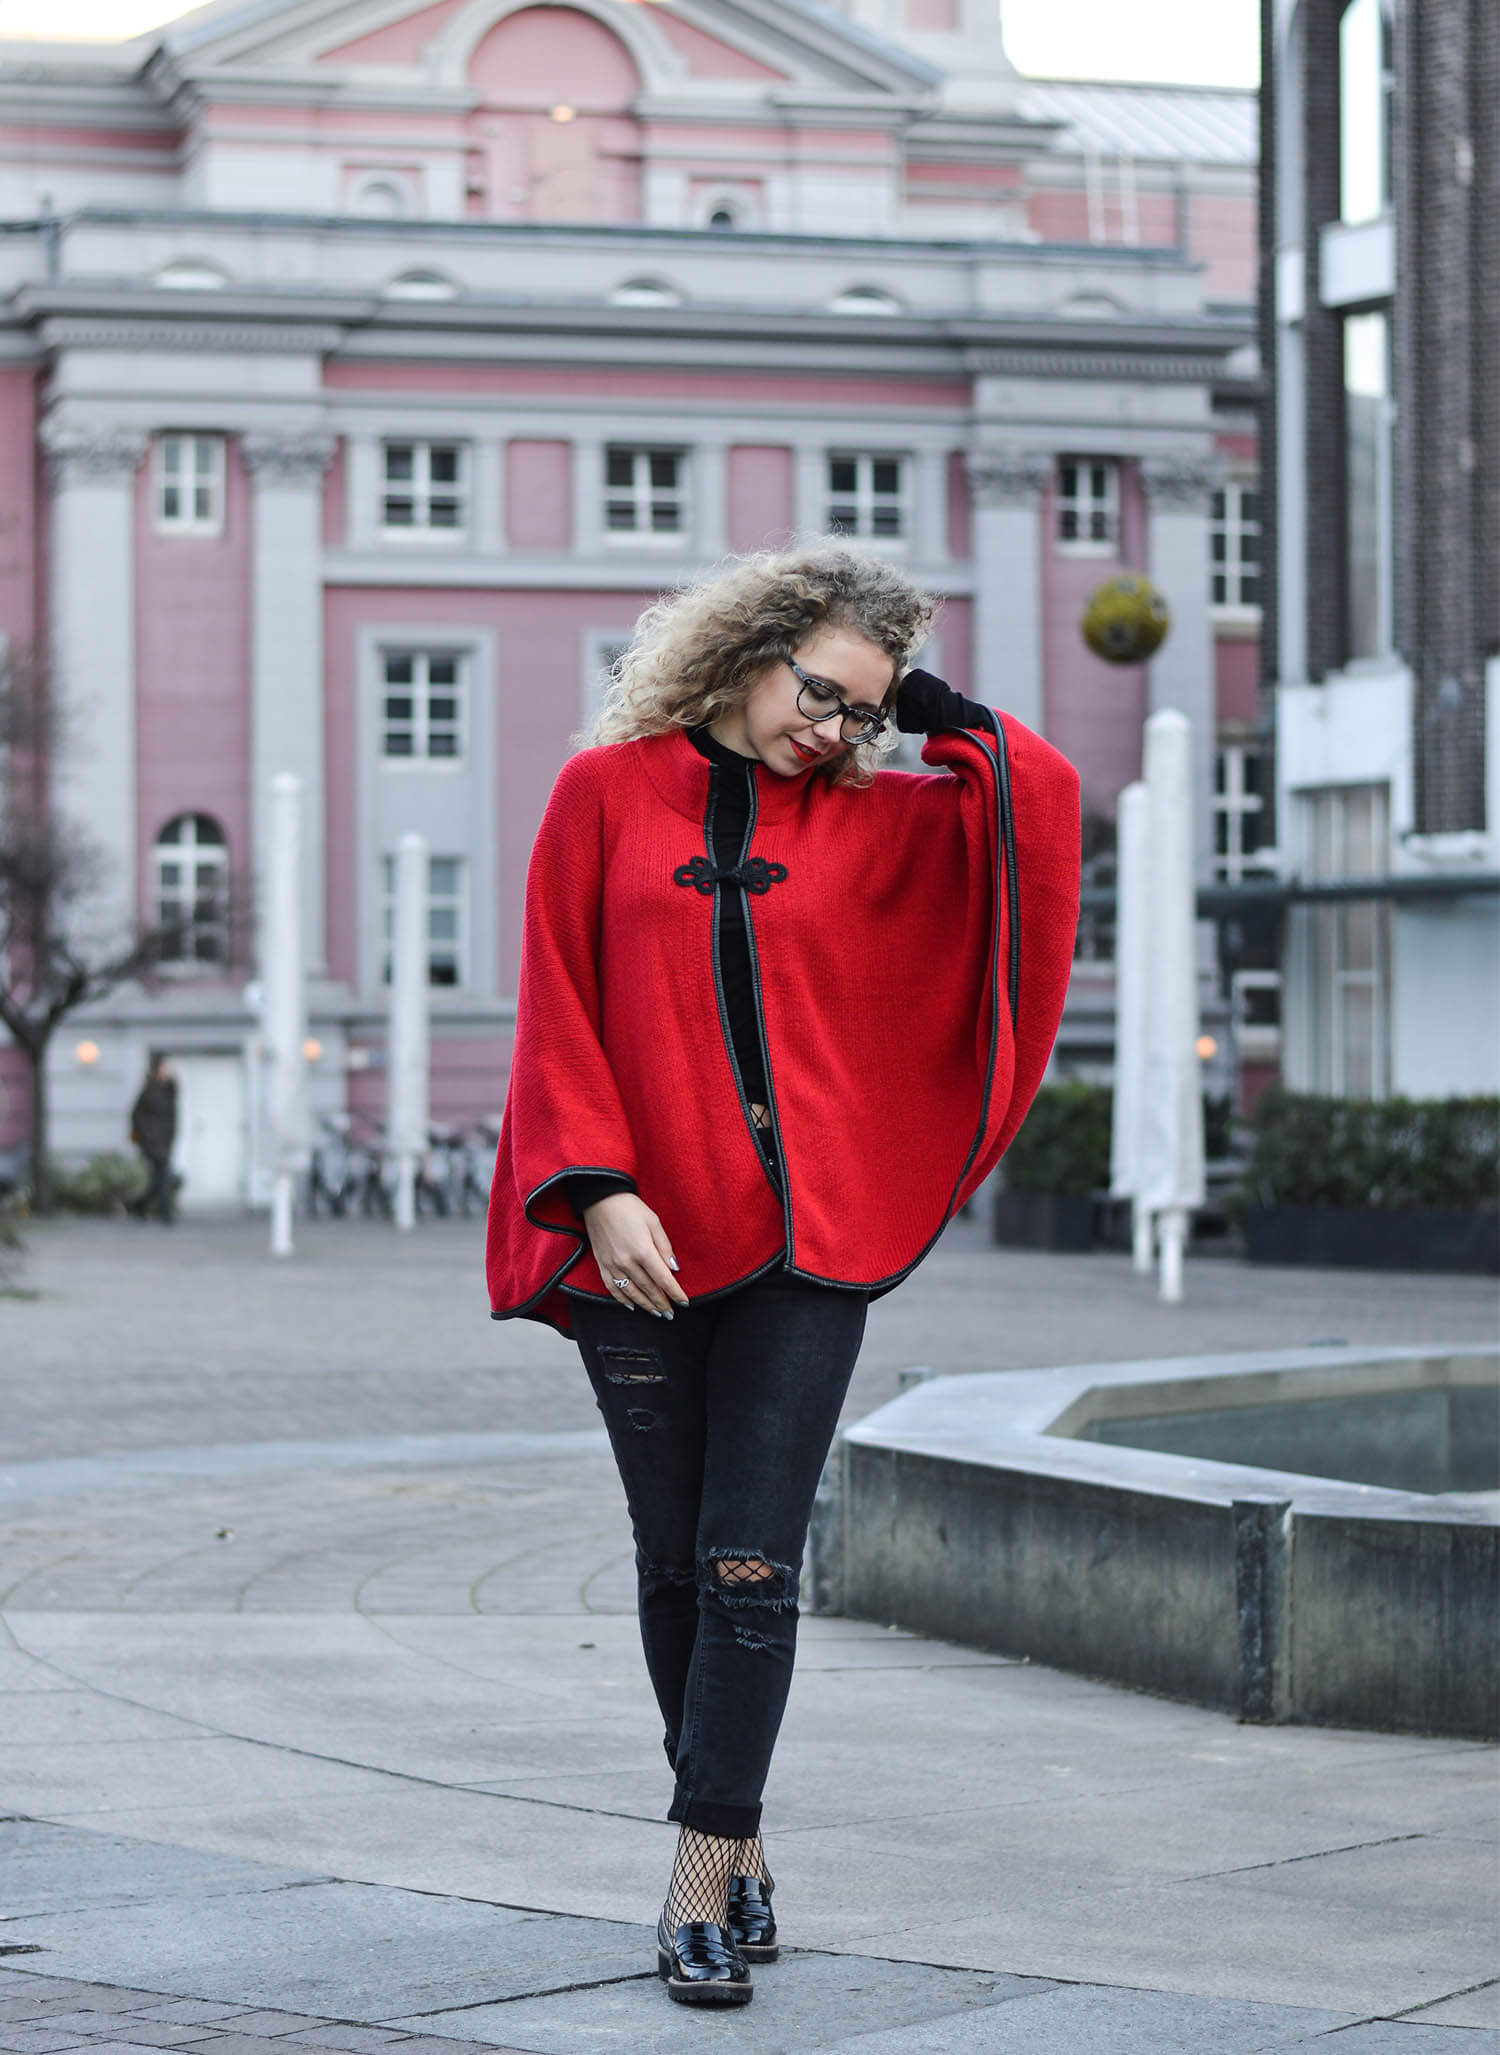 Kationette-Fashionblog-Germany-Streetstyle-Outfit-RedRidingHood-Ripped-Jeans-Fishnet-curls